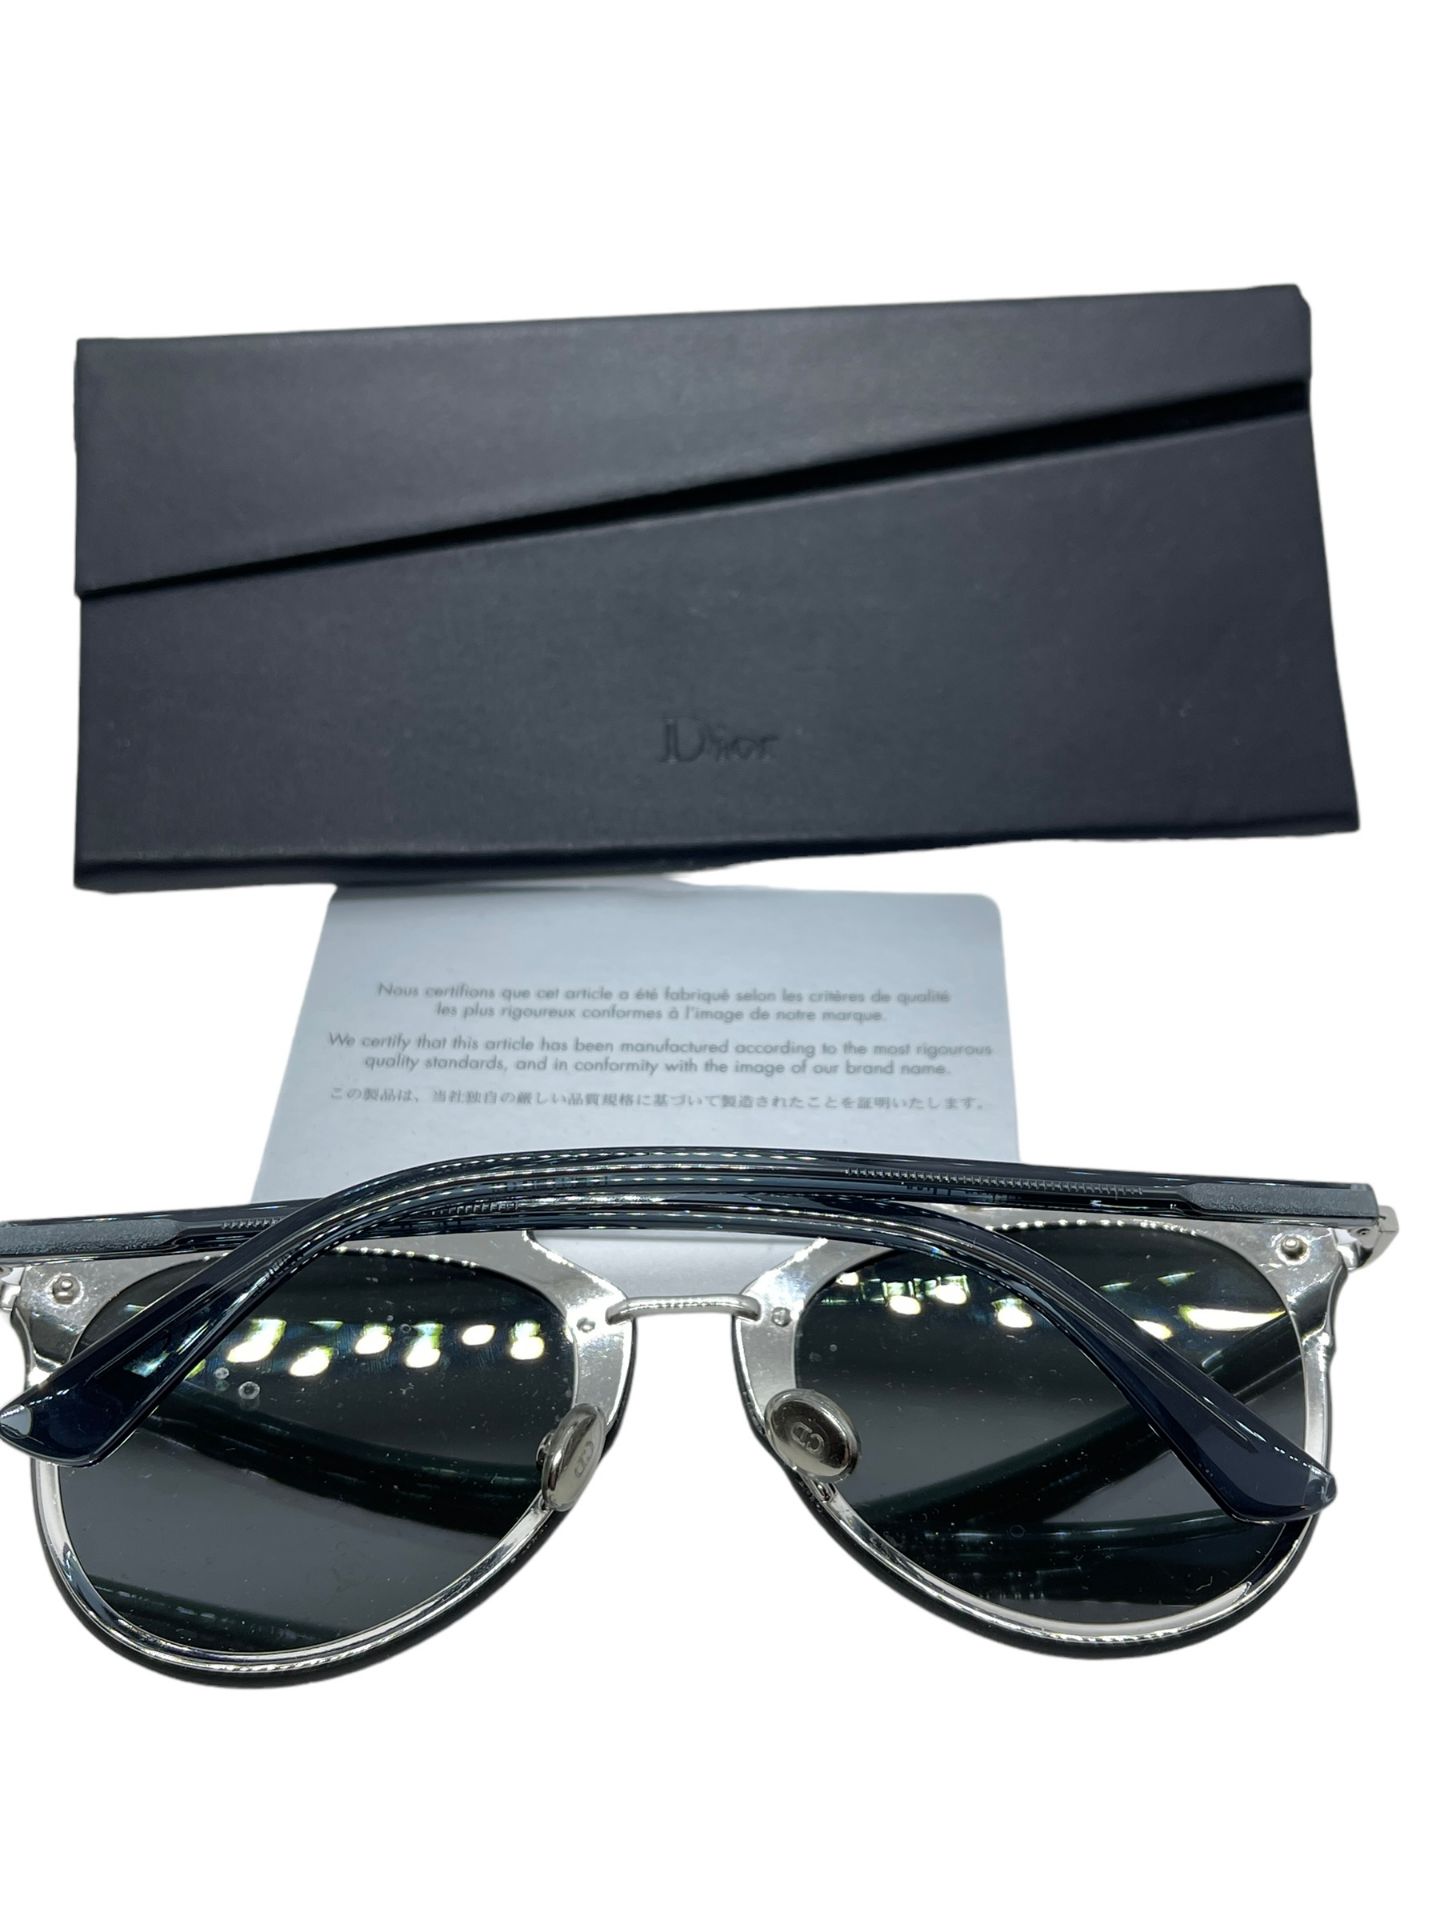 DIOR UNISEX SUNGLASSES XDEMO WITH BCASE PAPER ECT - Image 5 of 6